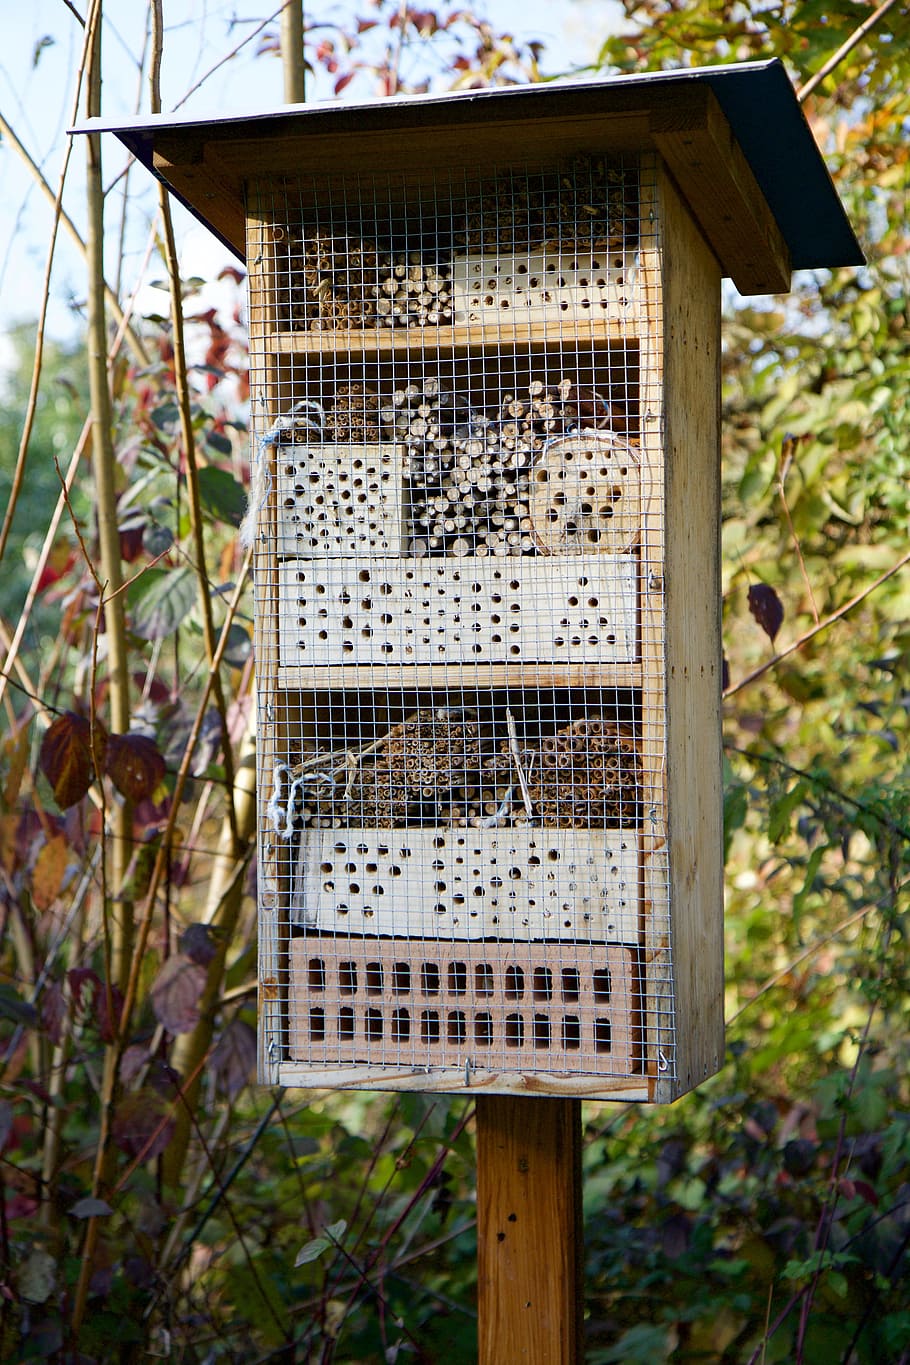 Nature, Wood, Wild Bees, Hotel, wild bee hotel, day, outdoors, beehive, close-up, animal themes